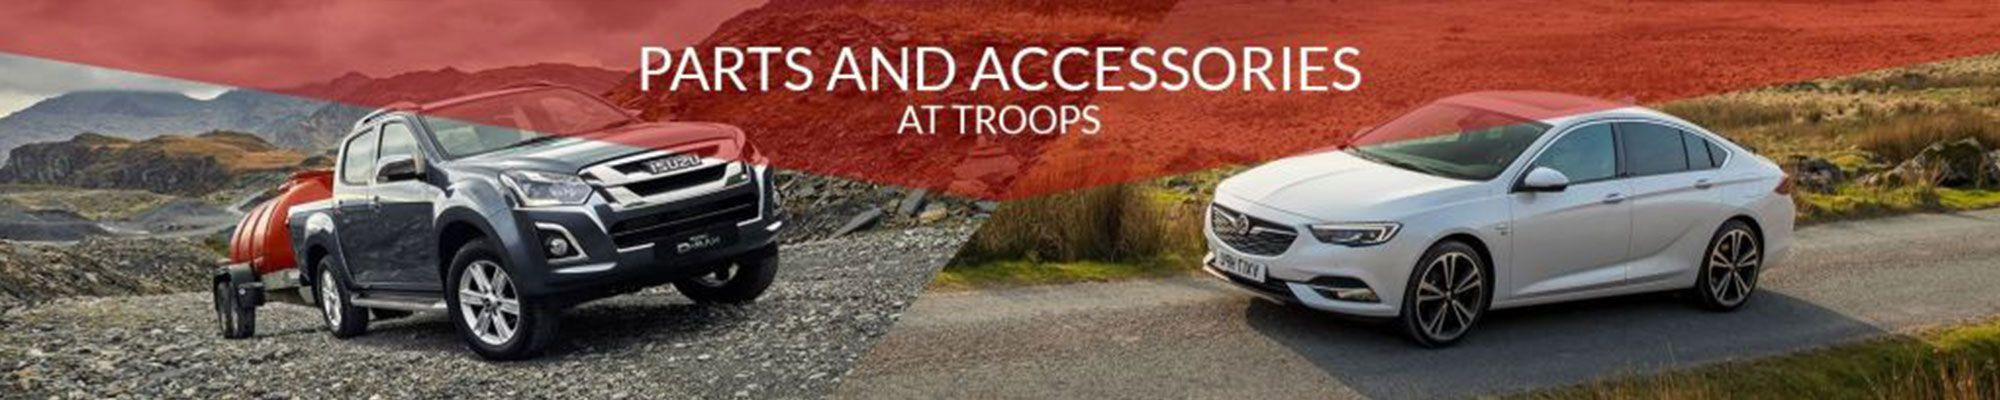 PARTS & ACCESSORIES AT TROOPS